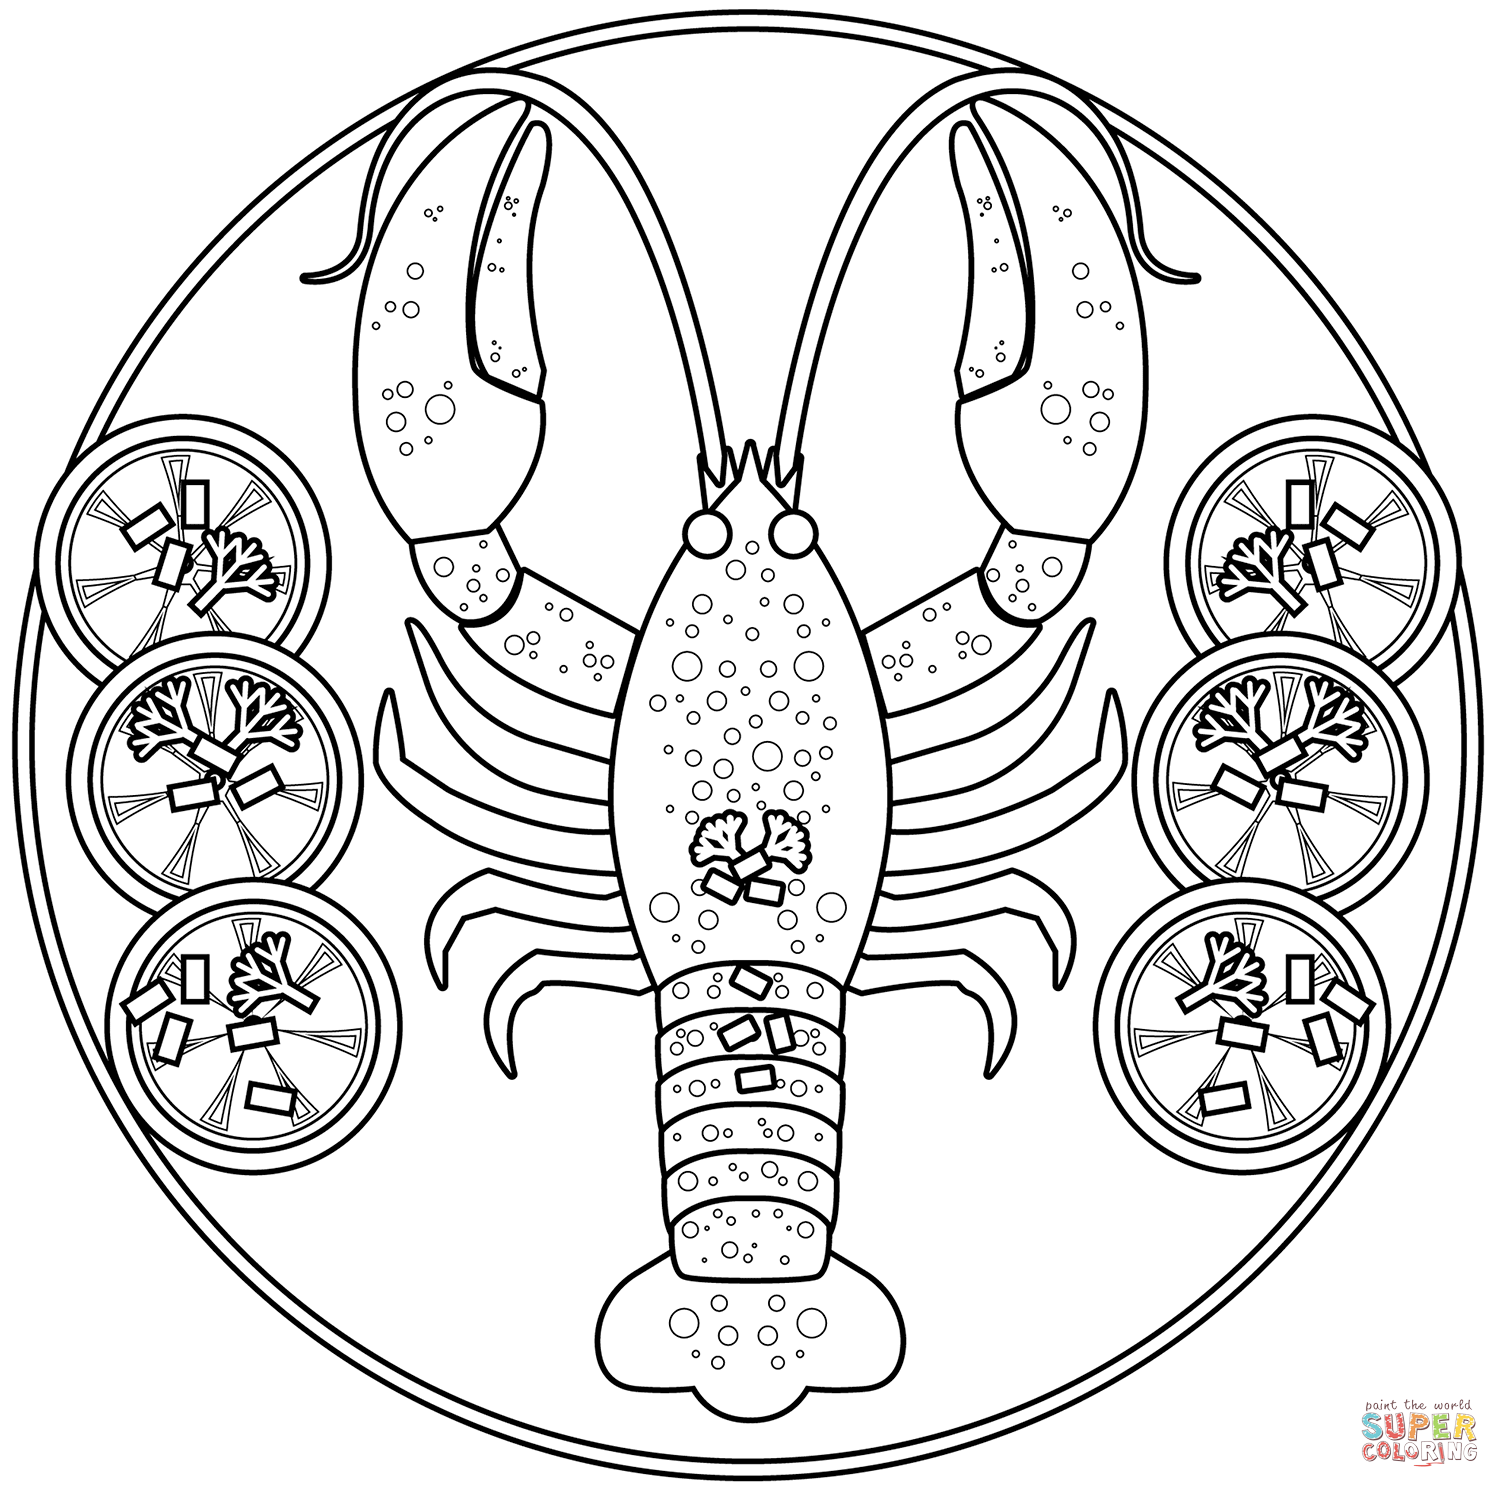 Crayfish coloring page free printable coloring pages